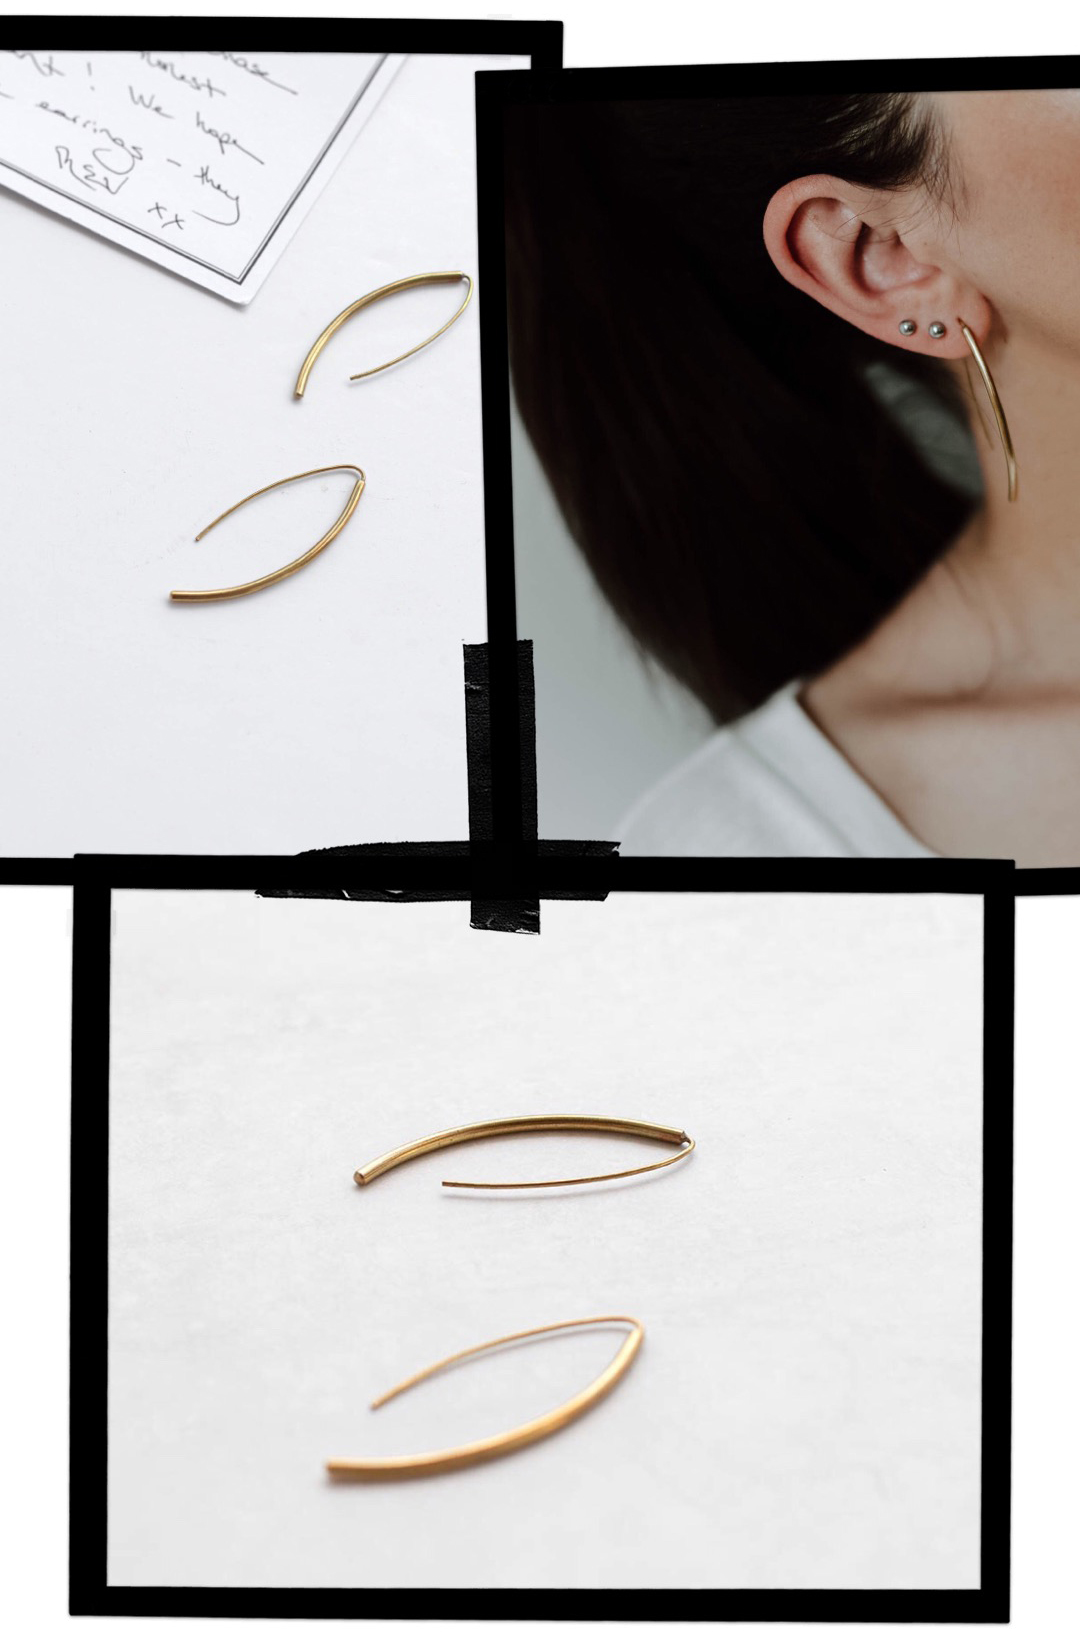 An ethical and stylish minimal jewellery brand to try